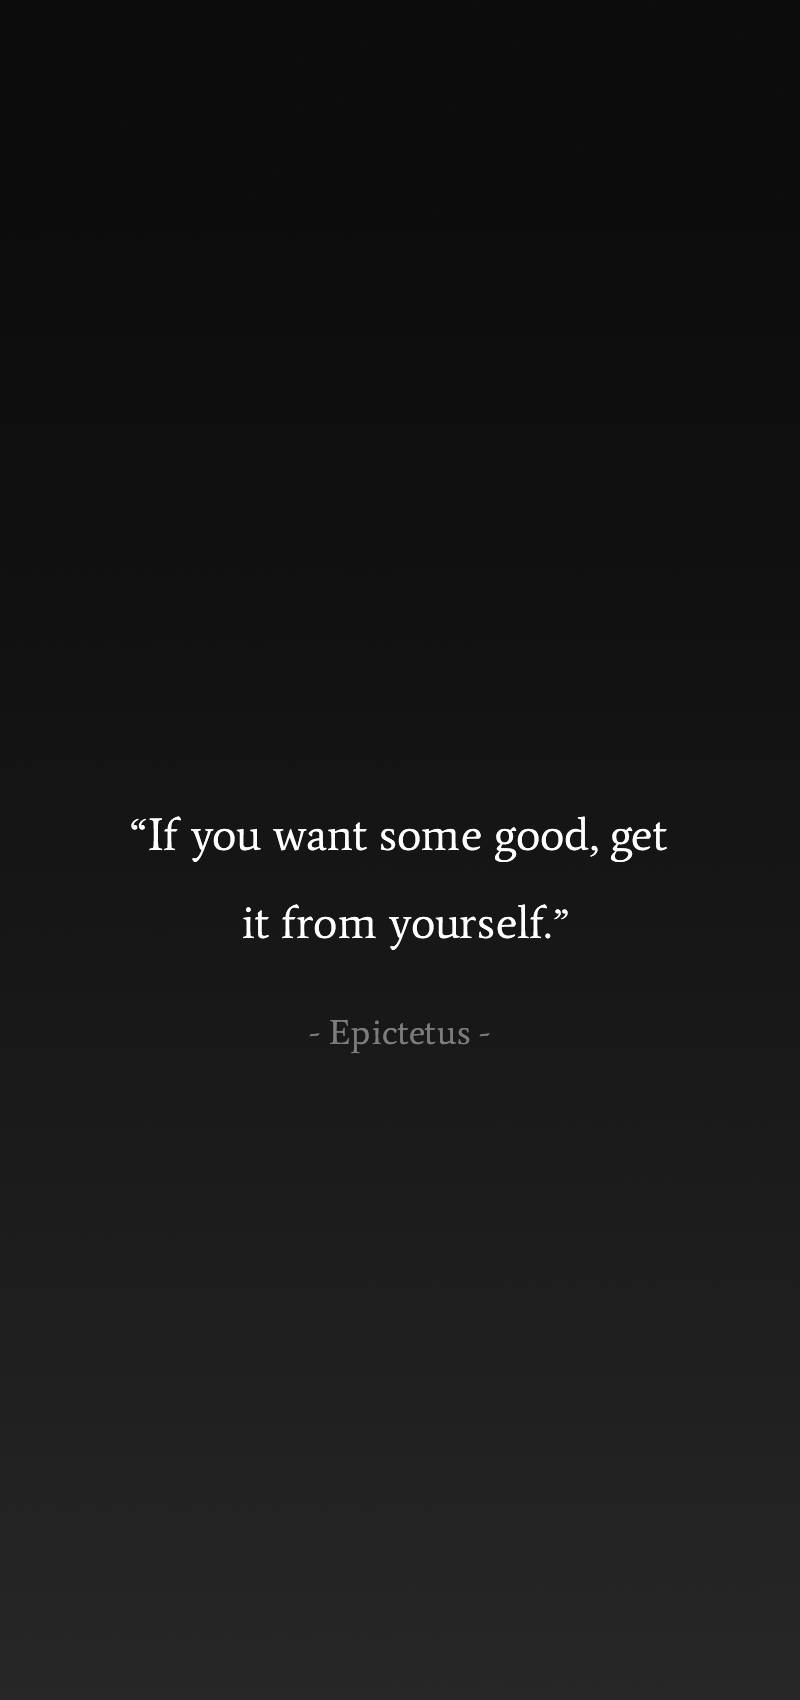 Get Good From Yourself Stoicism Wallpaper